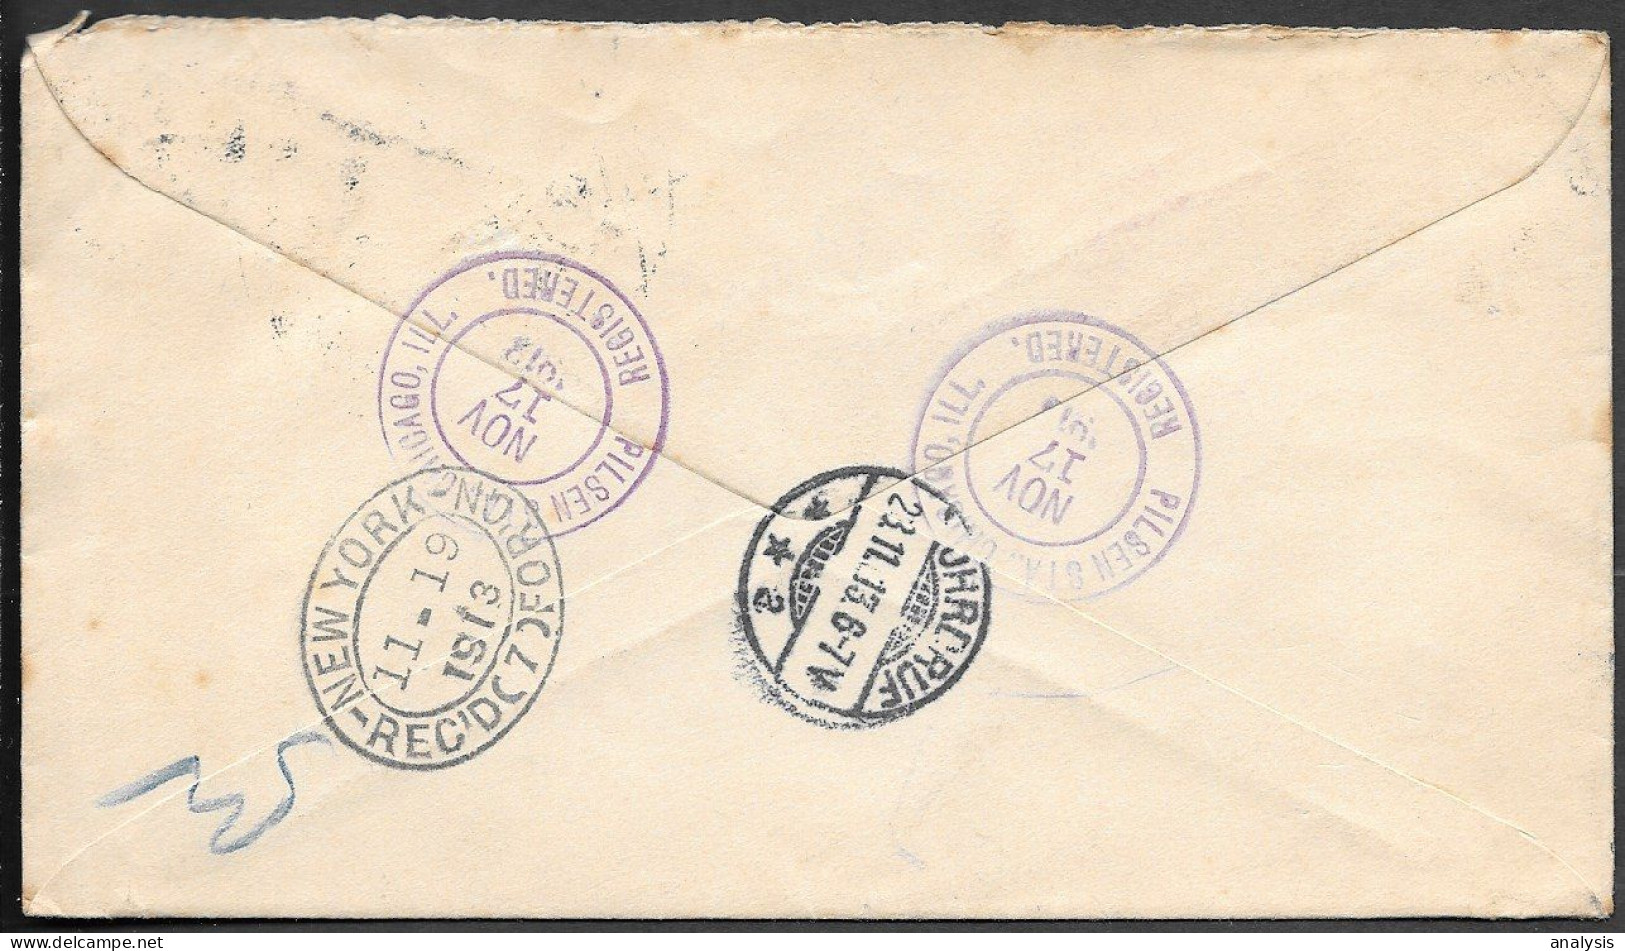 USA Chicago Registered Uprated 2c Postal Stationery Cover Mailed To Ohrdruf Germany 1913 - Lettres & Documents